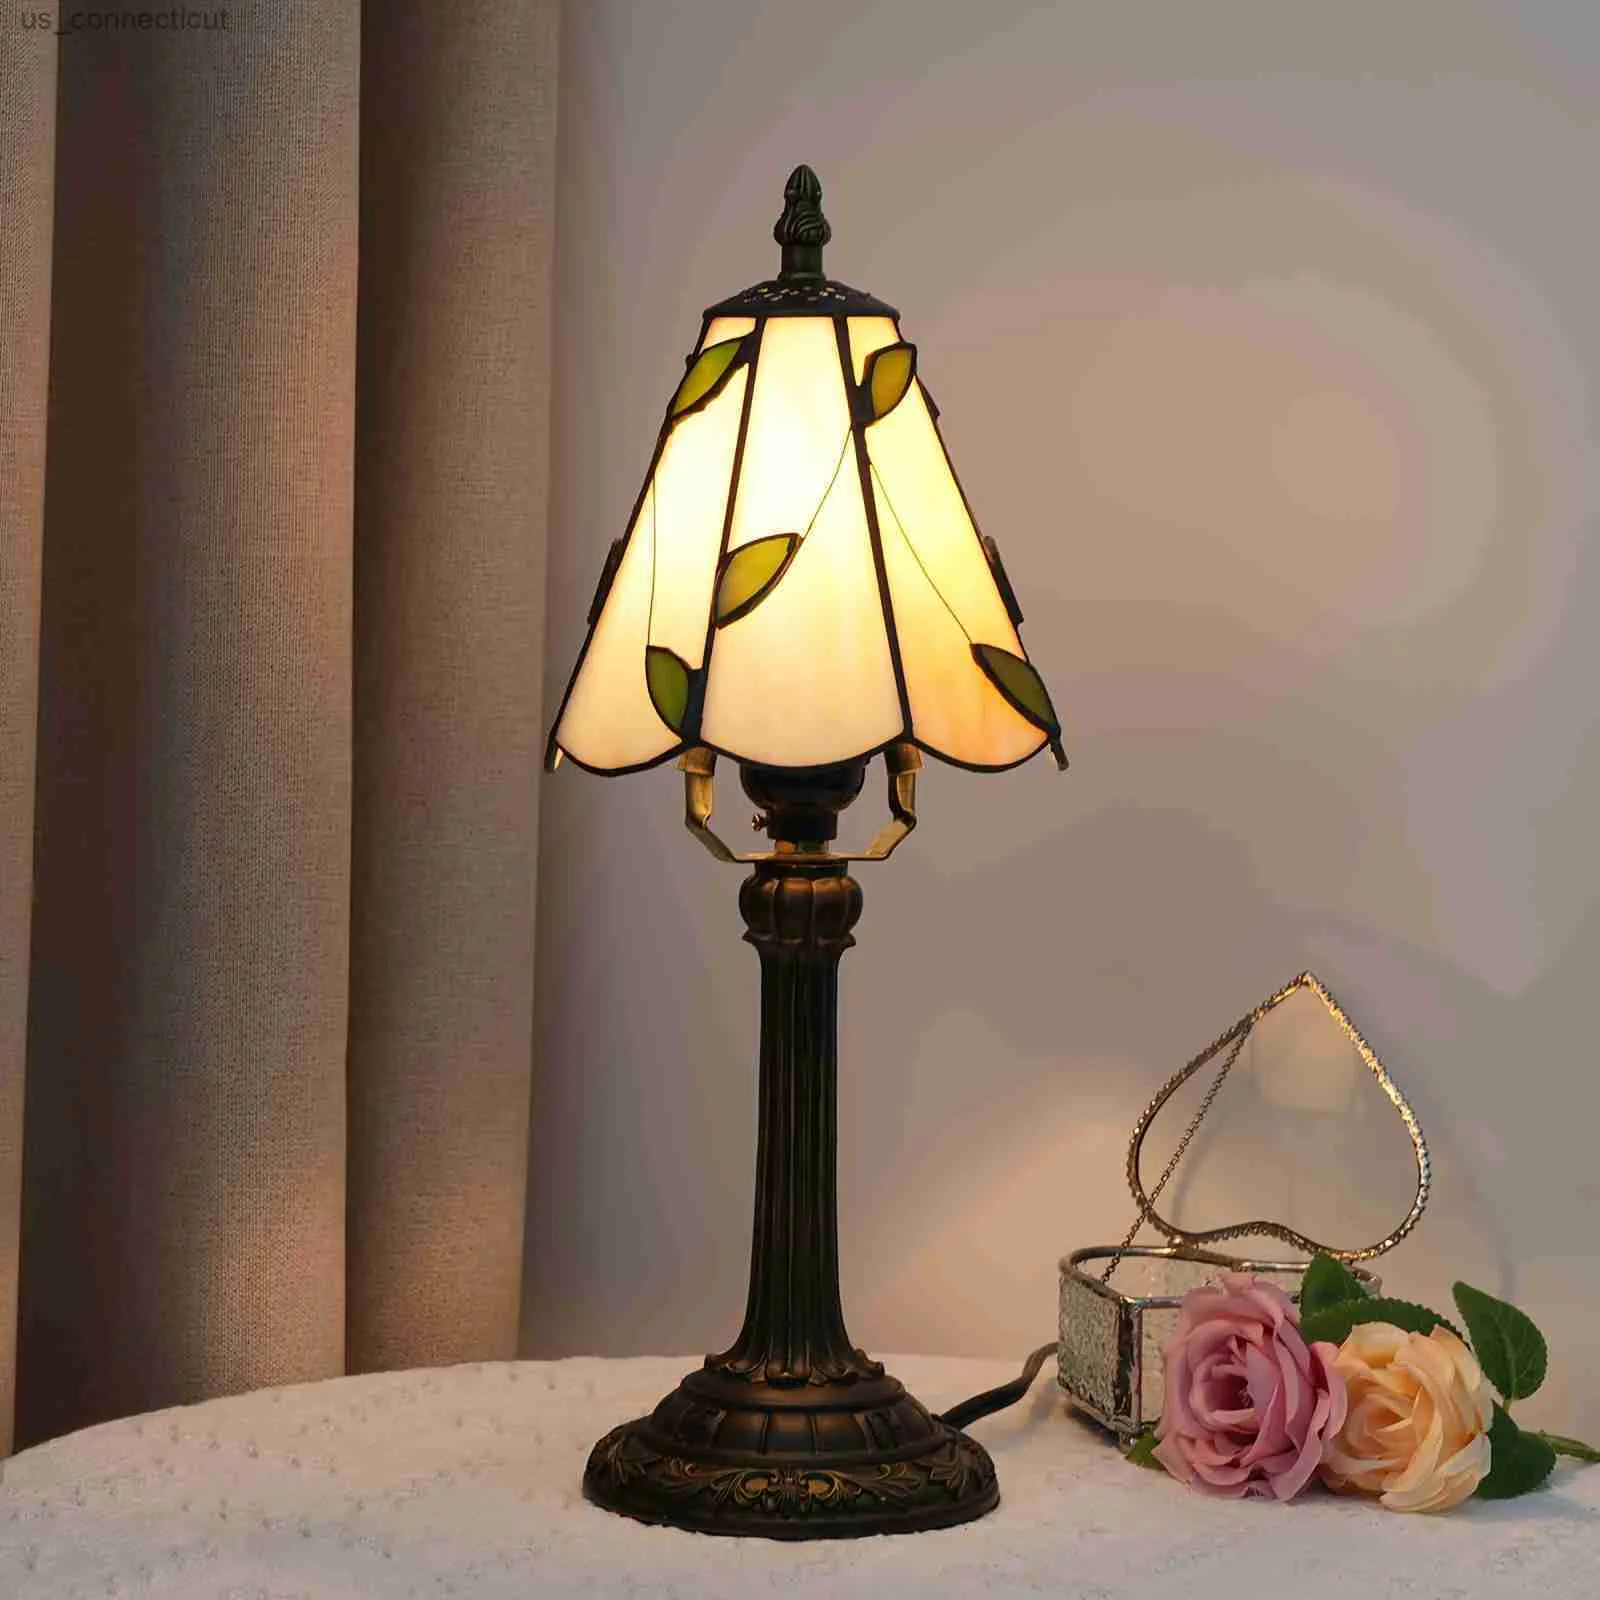 Table Lamps 1pc Green Leaf Stained Glass Table Lamp - Small Night Light for Bedroom or Childrens Room - Creative Home Decoration - Warm and Romantic Gift Lamp